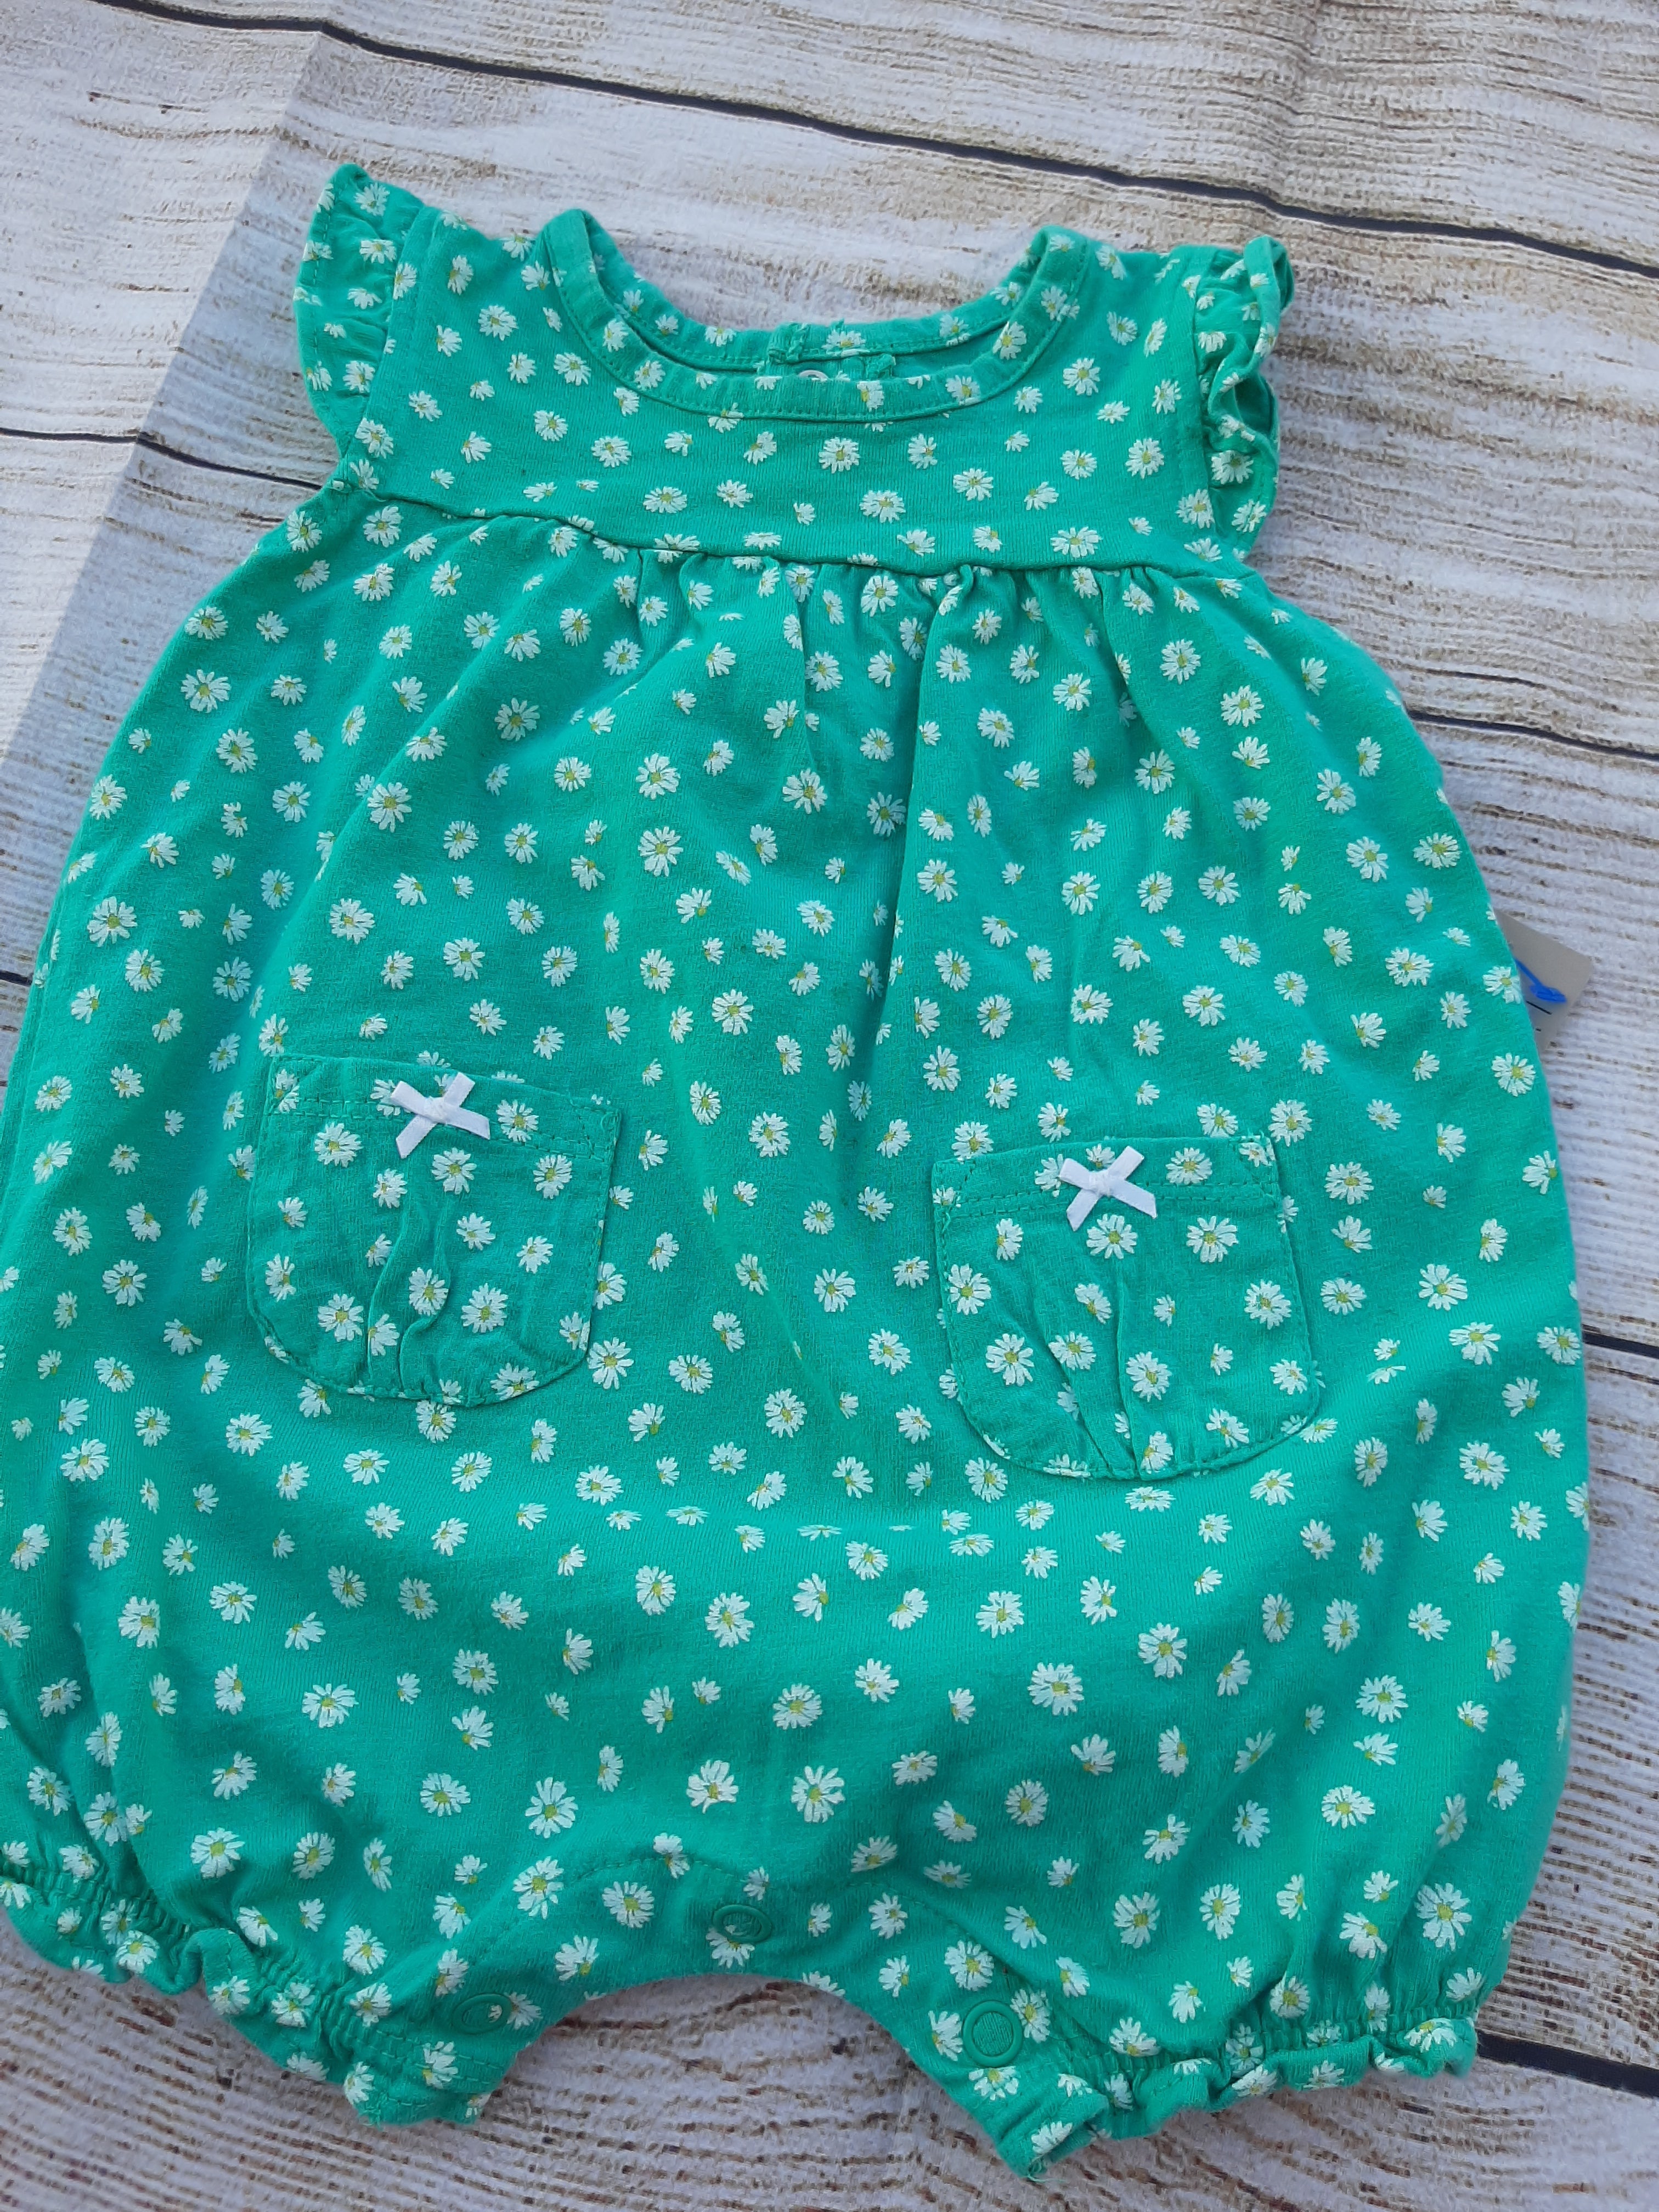 Carter's  Baby Girl Daisy 1pc Outfit sz 6mo